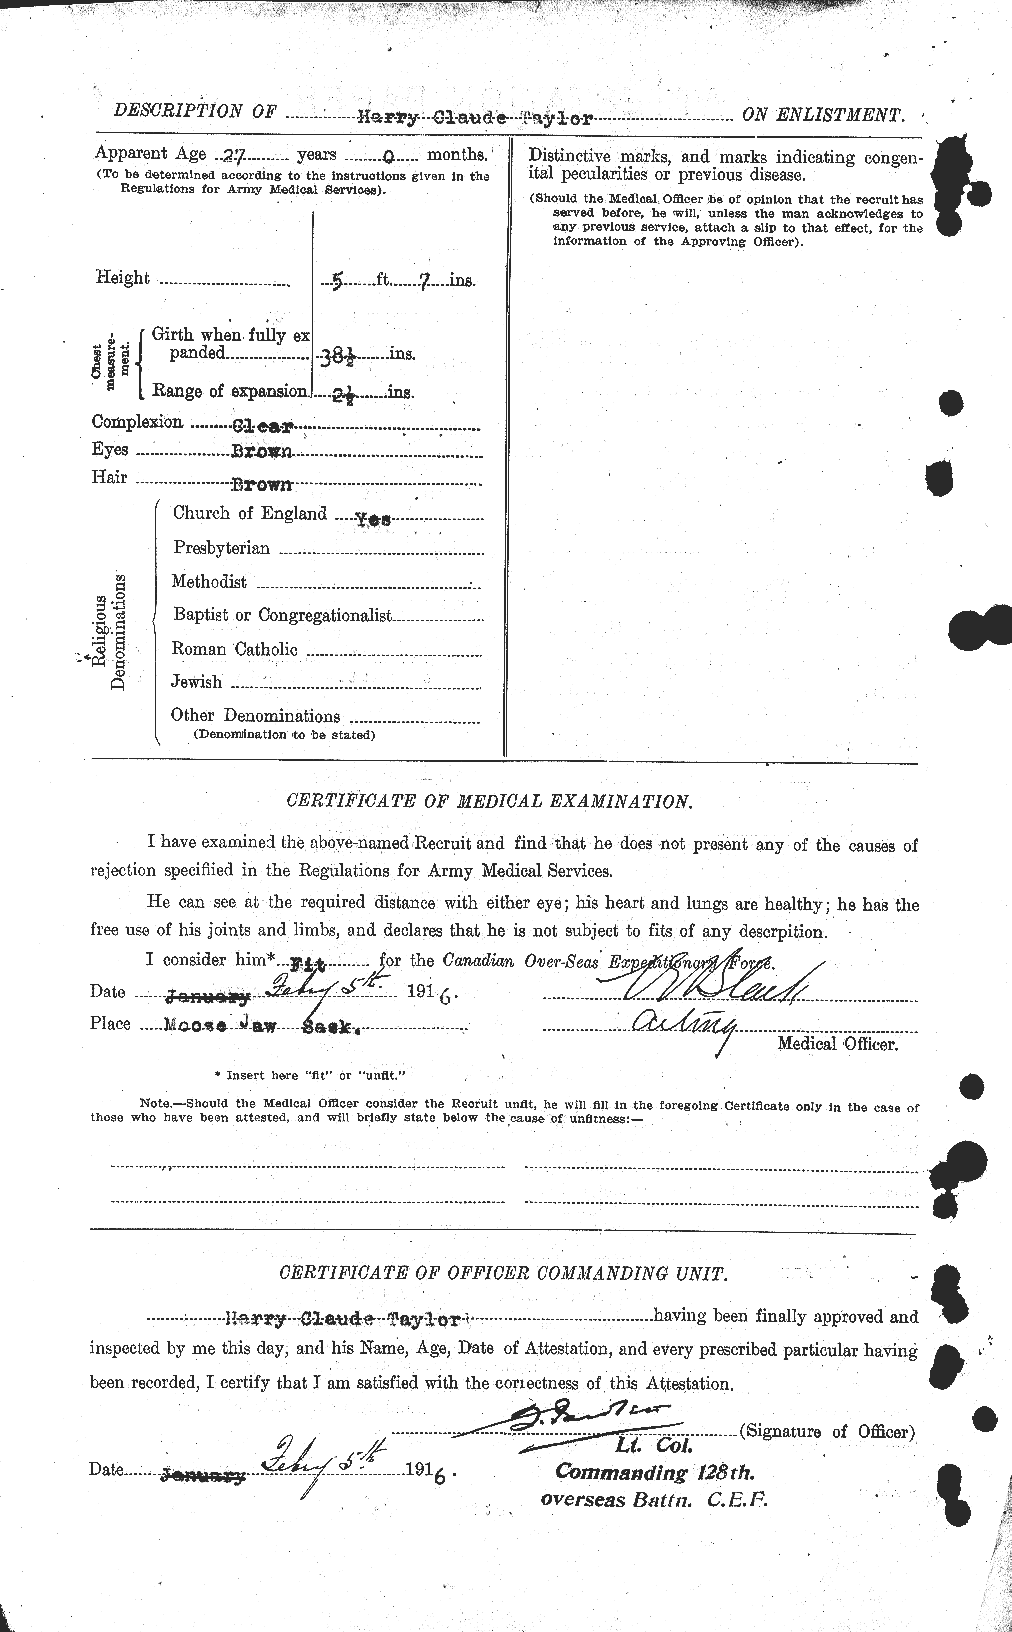 Personnel Records of the First World War - CEF 626487b